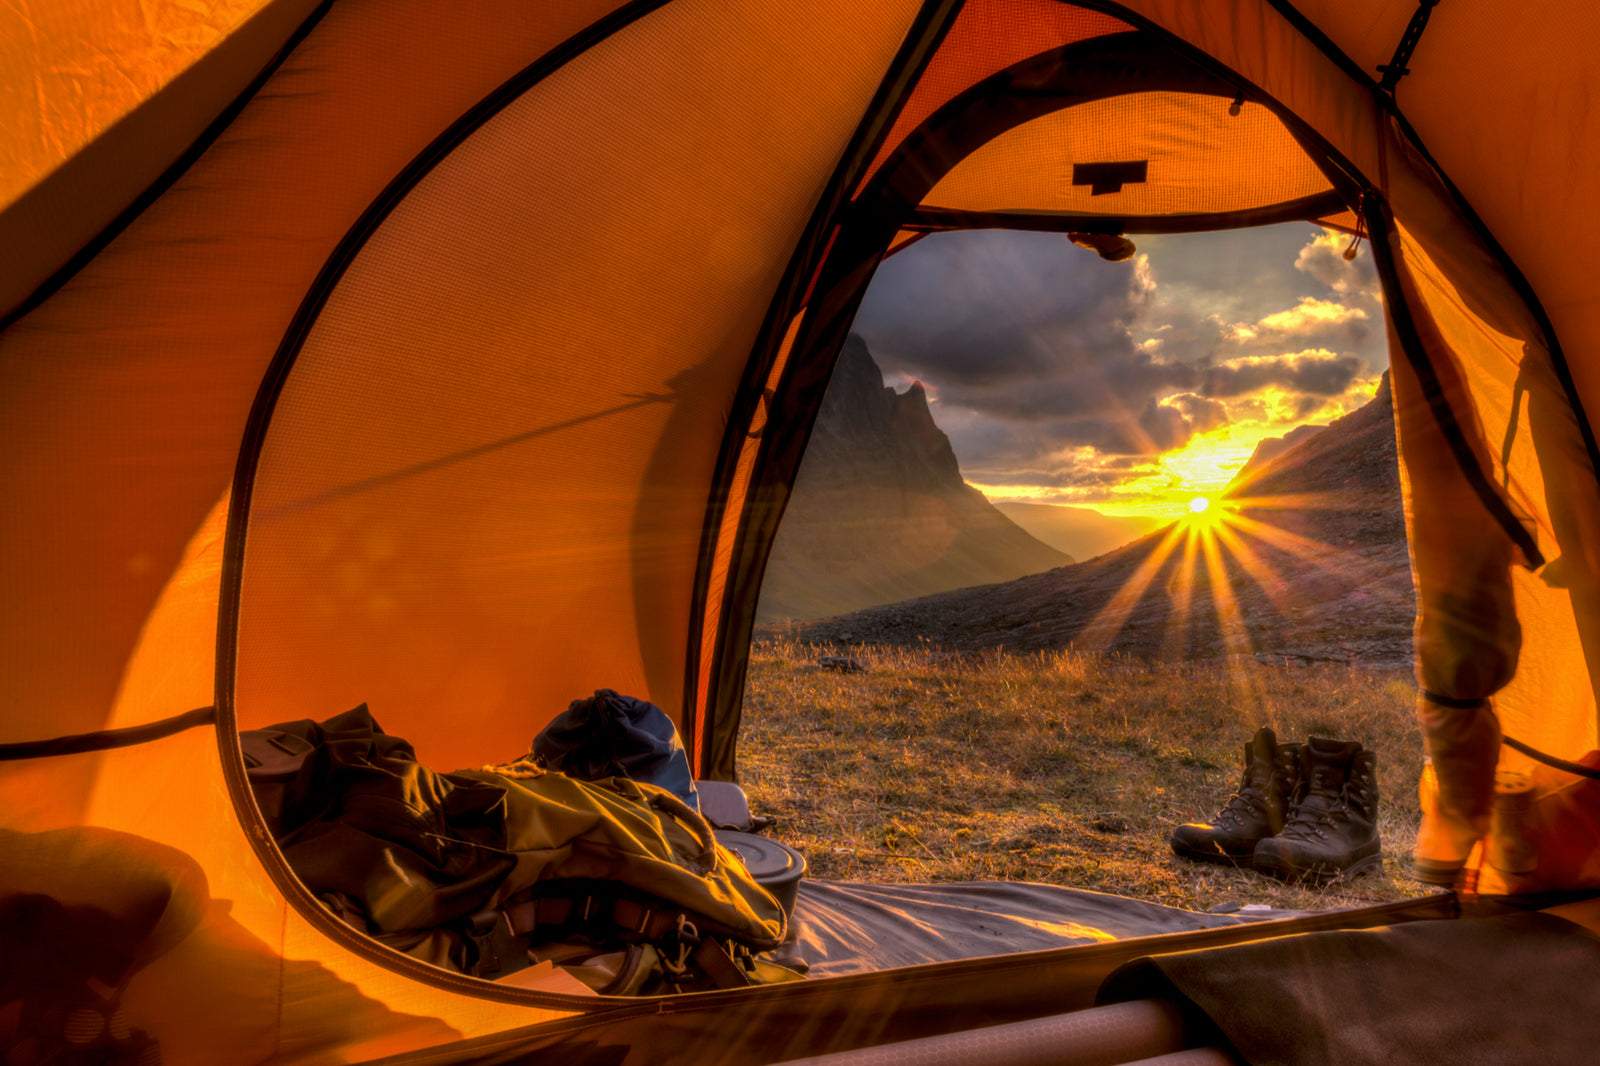 https://onetreeplanted.org/cdn/shop/articles/epic_camping_shot_from_tent_1600x.jpg?v=1618954111